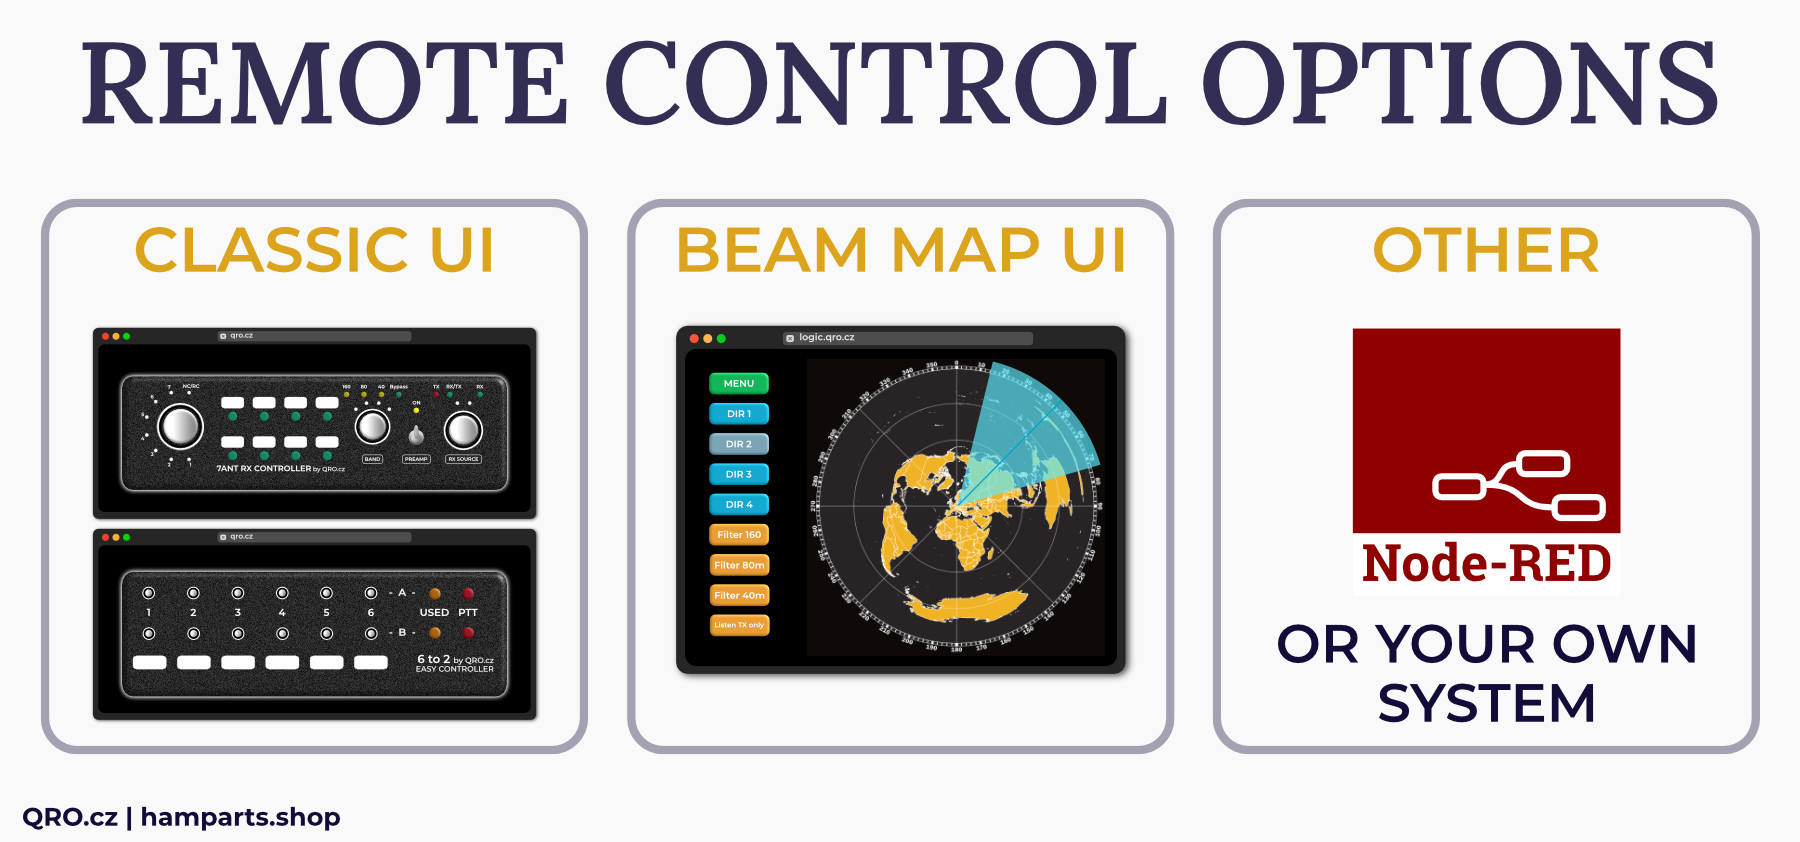 remote control options - control your devices remotely via classic user interface, Beam Map or Stream Deck, NodeRed by qro.cz hamparts.shop